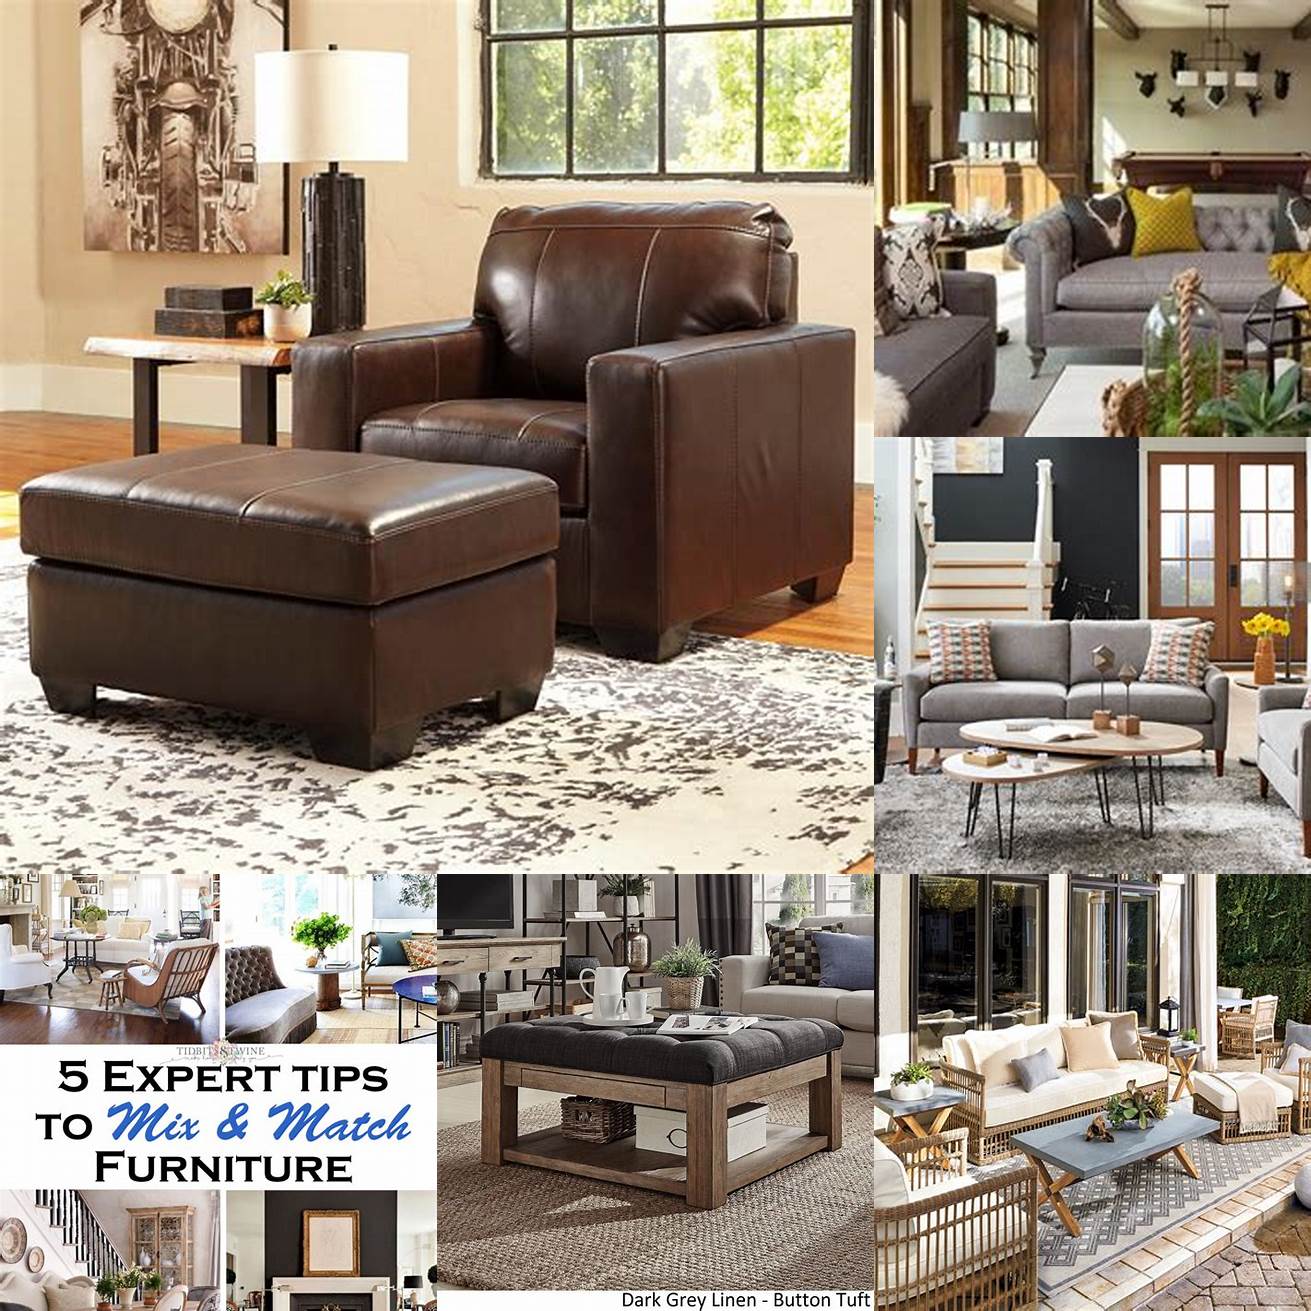 Mix and match Ottoman furniture works well with other styles such as vintage and industrial Mix and match pieces to create a unique look